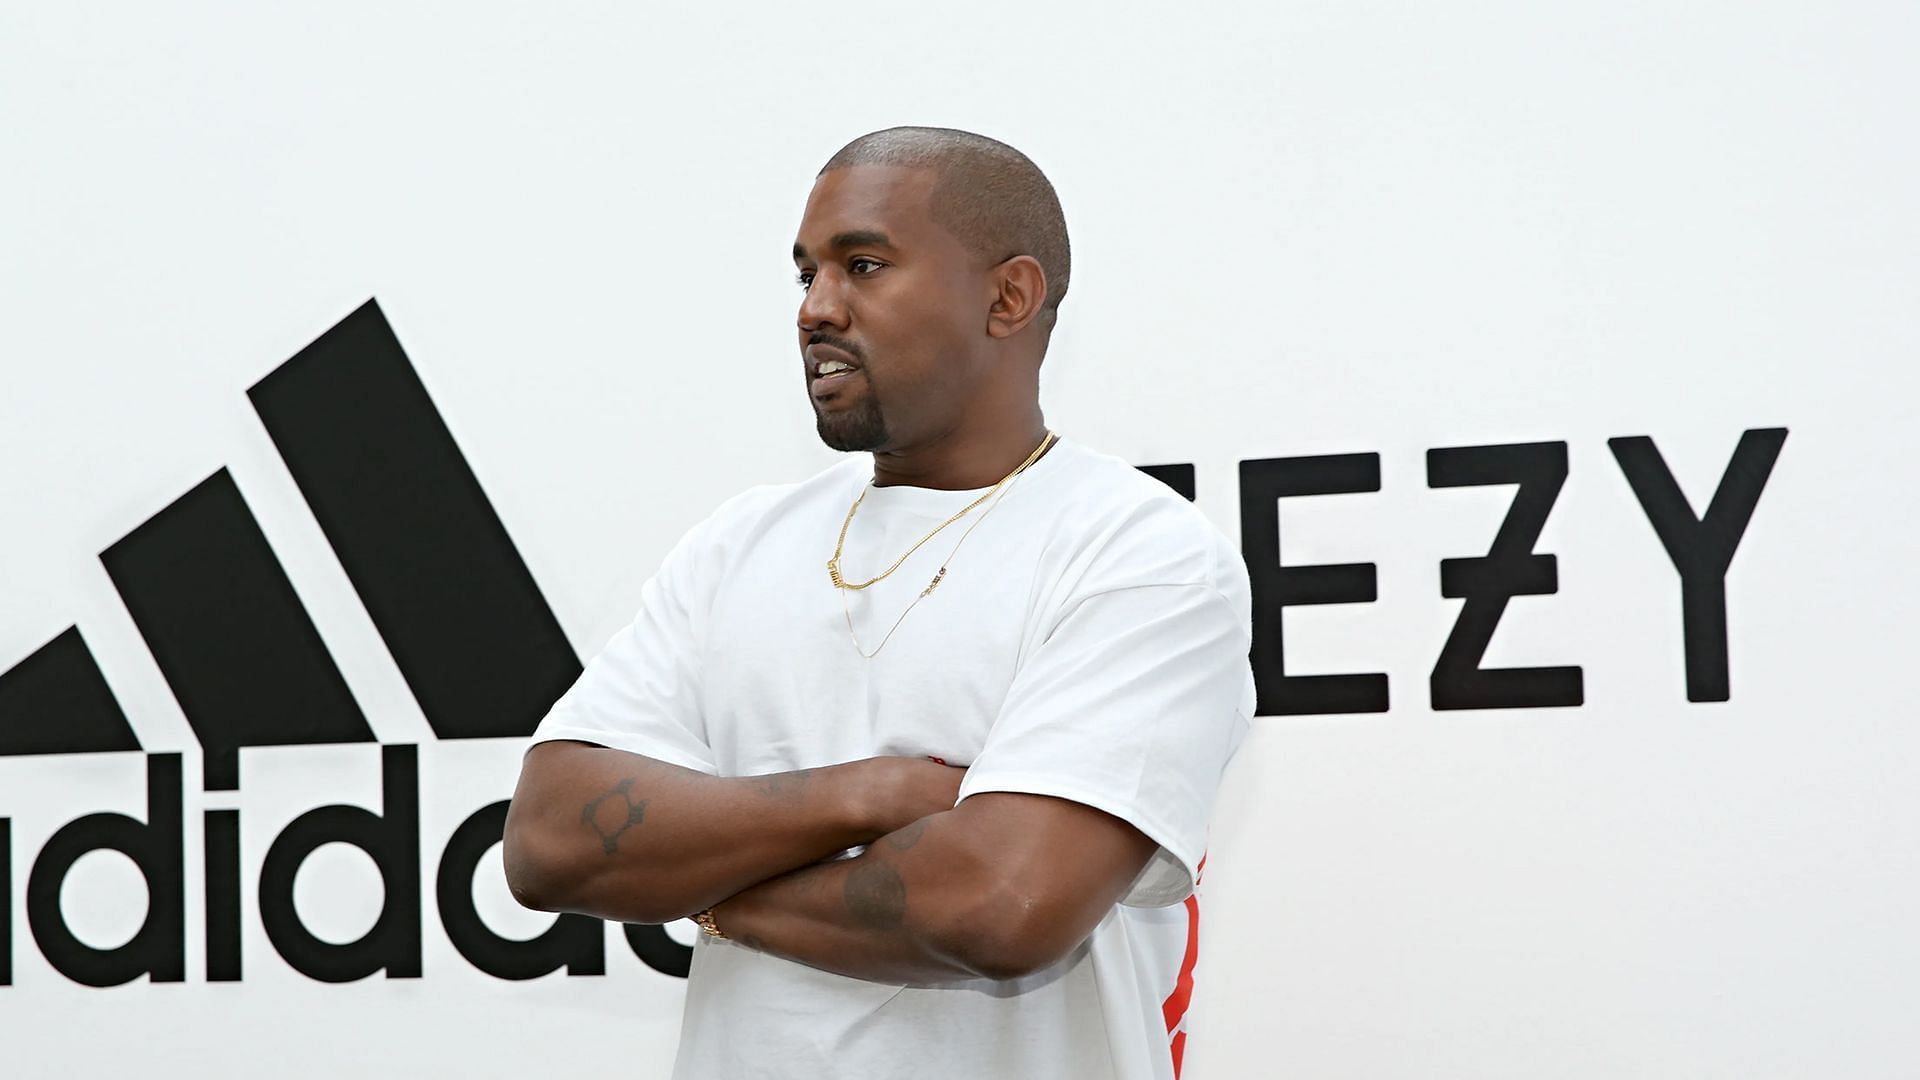 Kanye West launched his brand Yeezy in 2009 (Image via Getty)